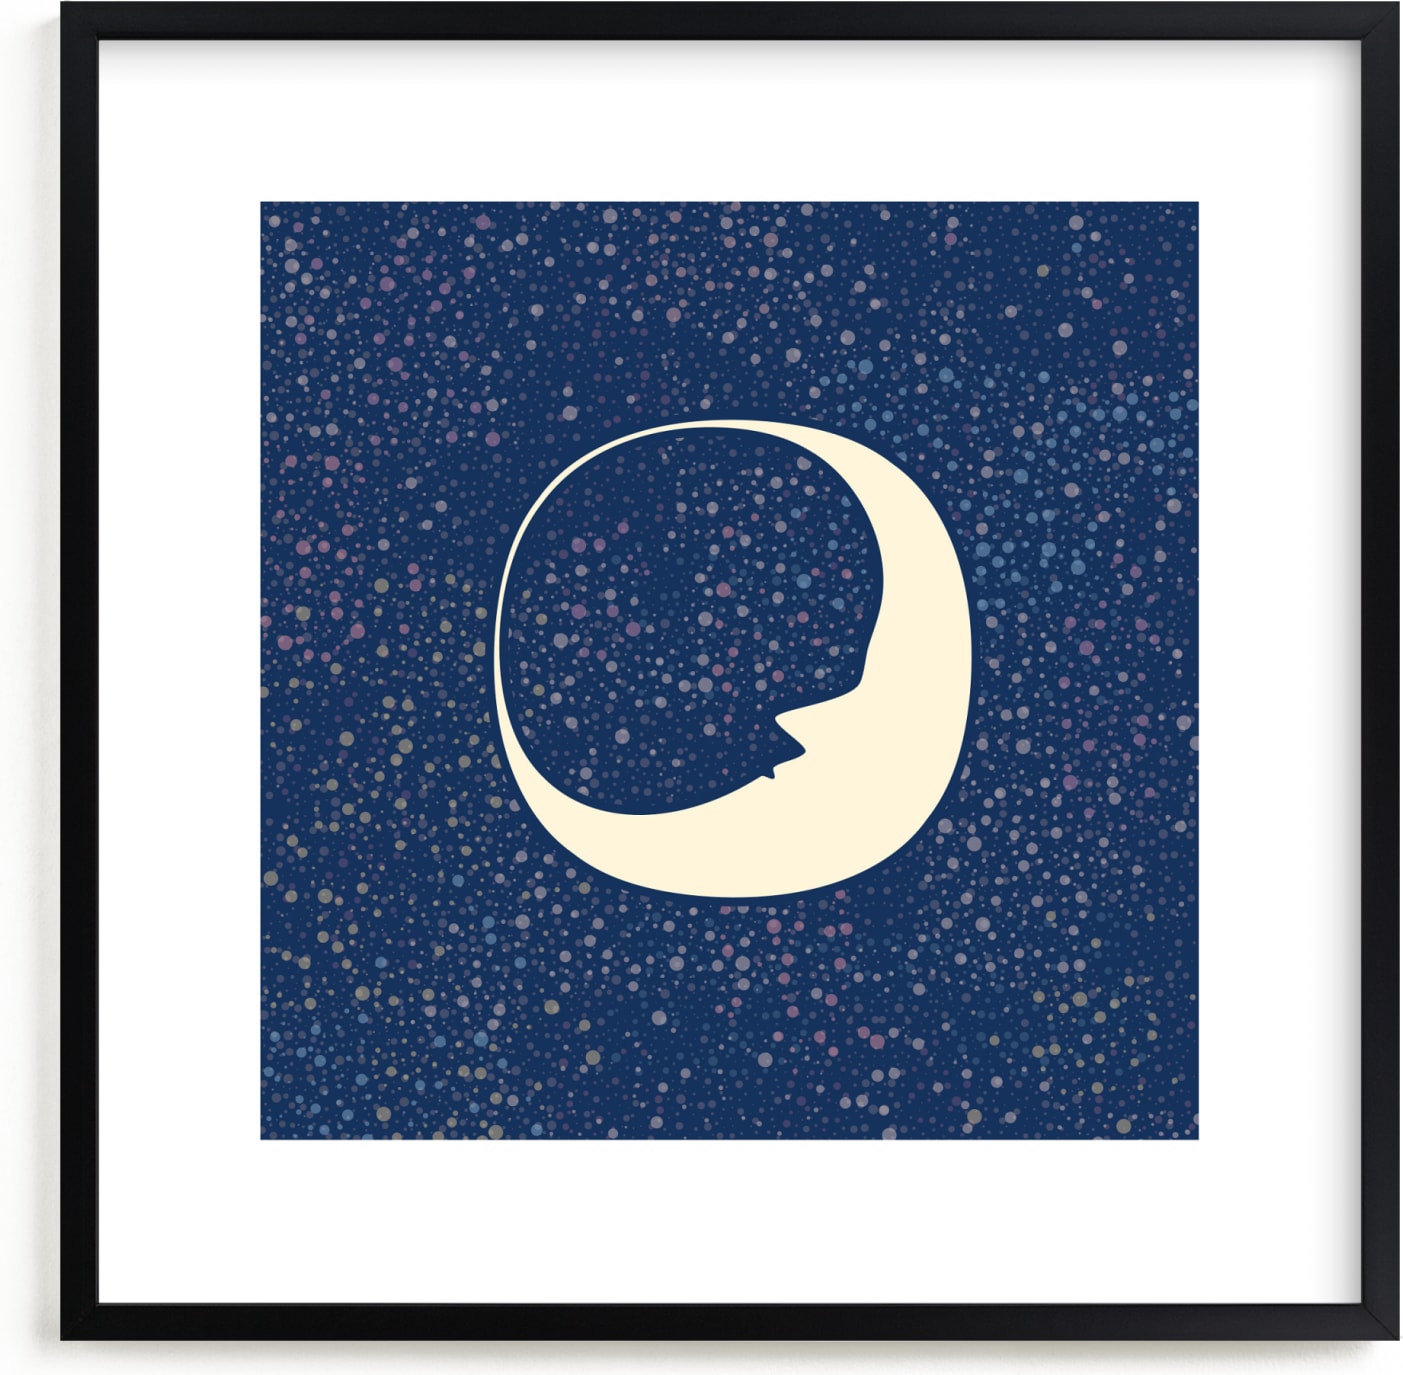 This is a blue nursery wall art by Katherine Morgan called Celestial Moon.